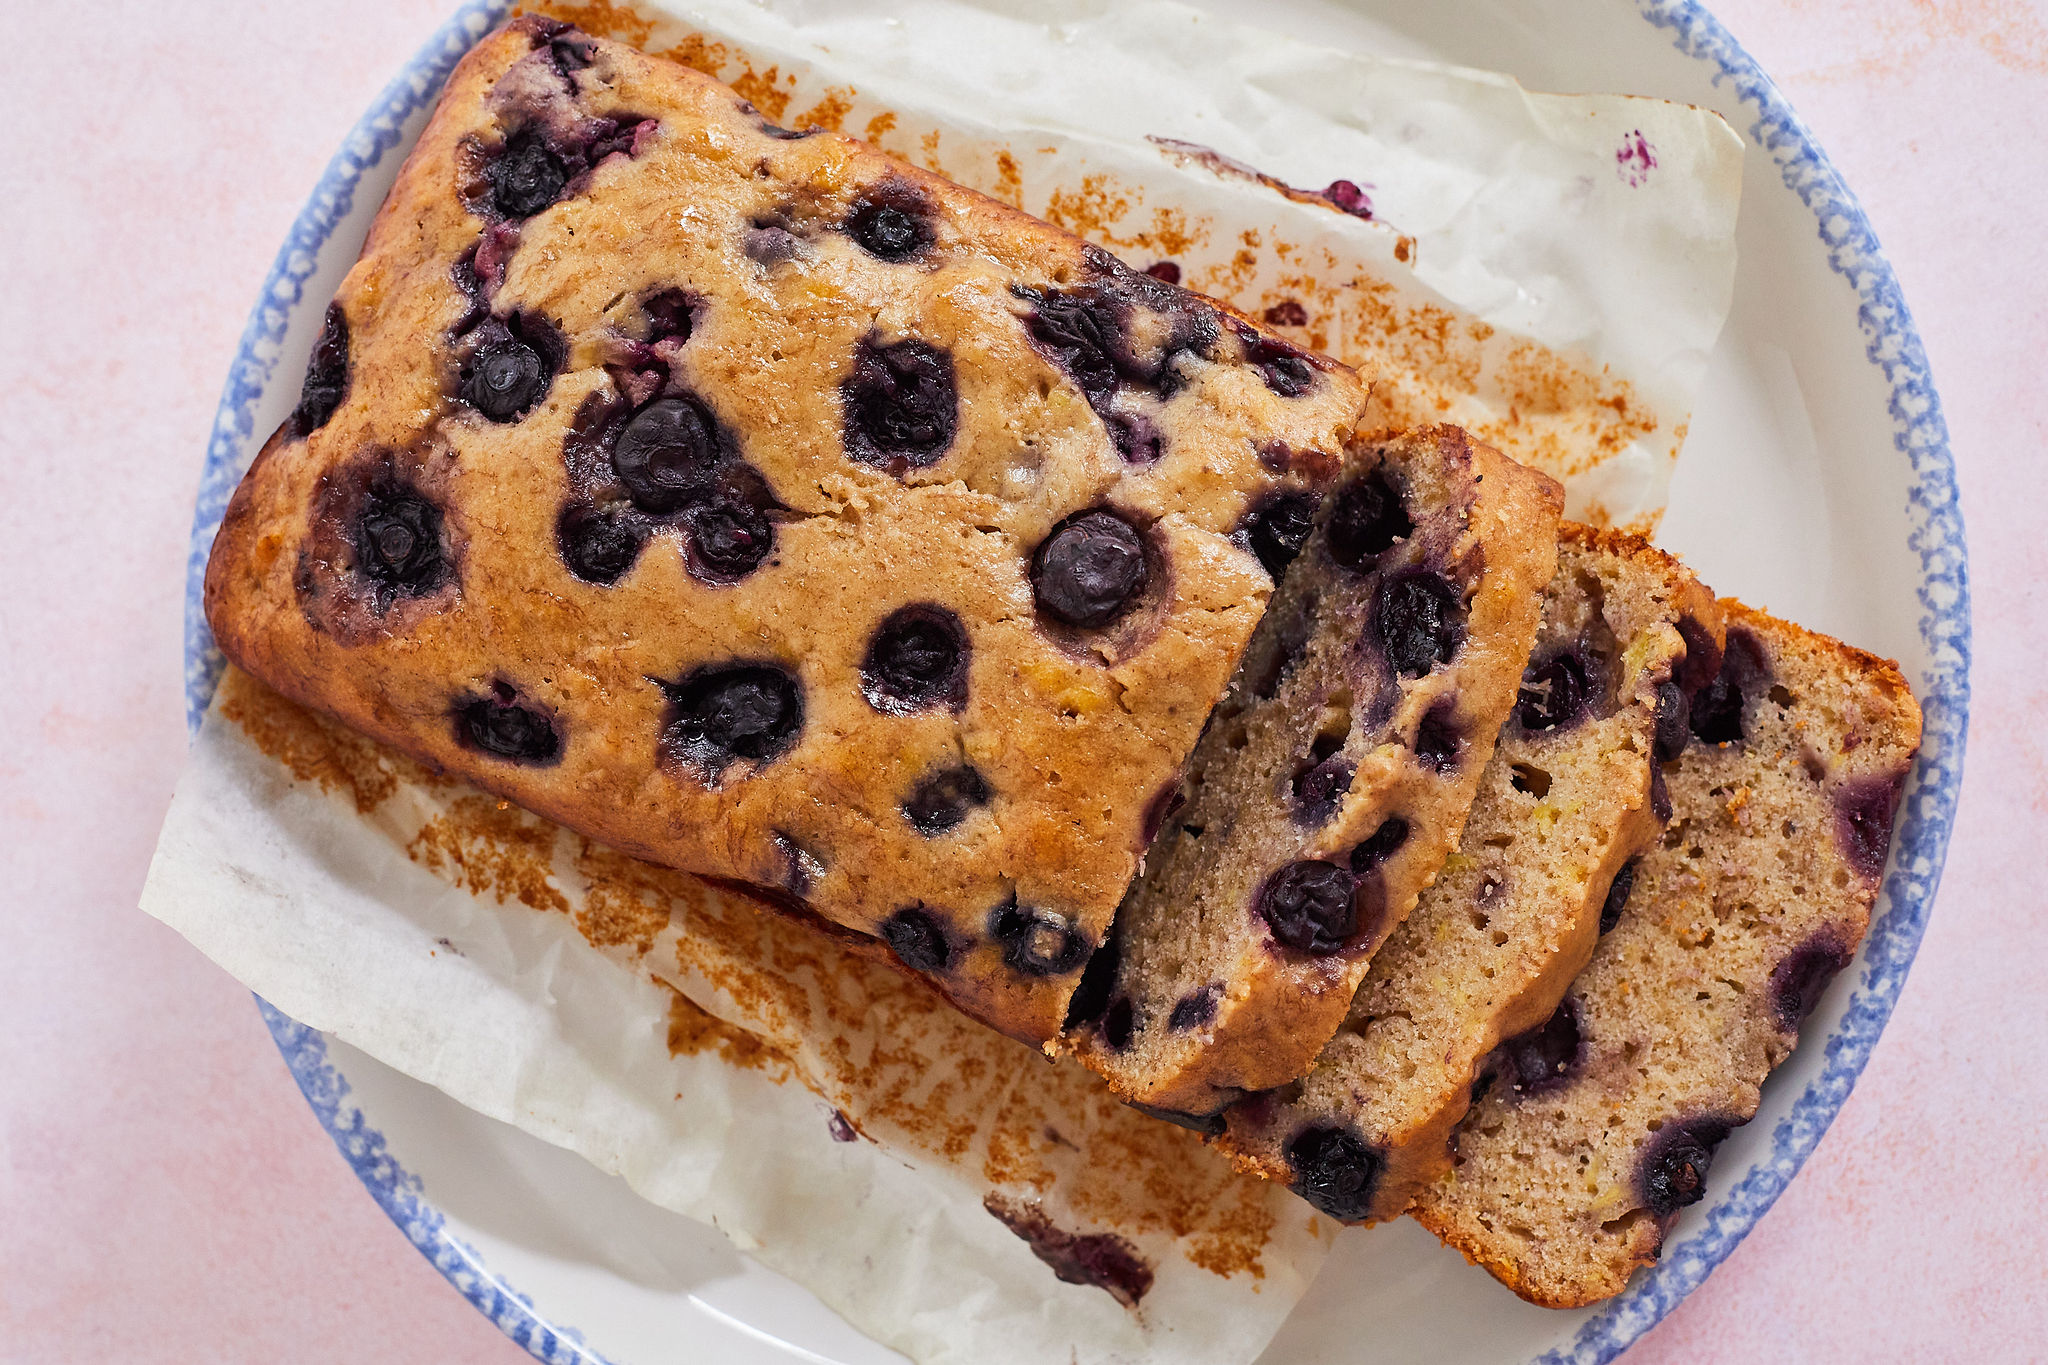 A top-down view of the best blueberry banana bread recipe you'll ever have.